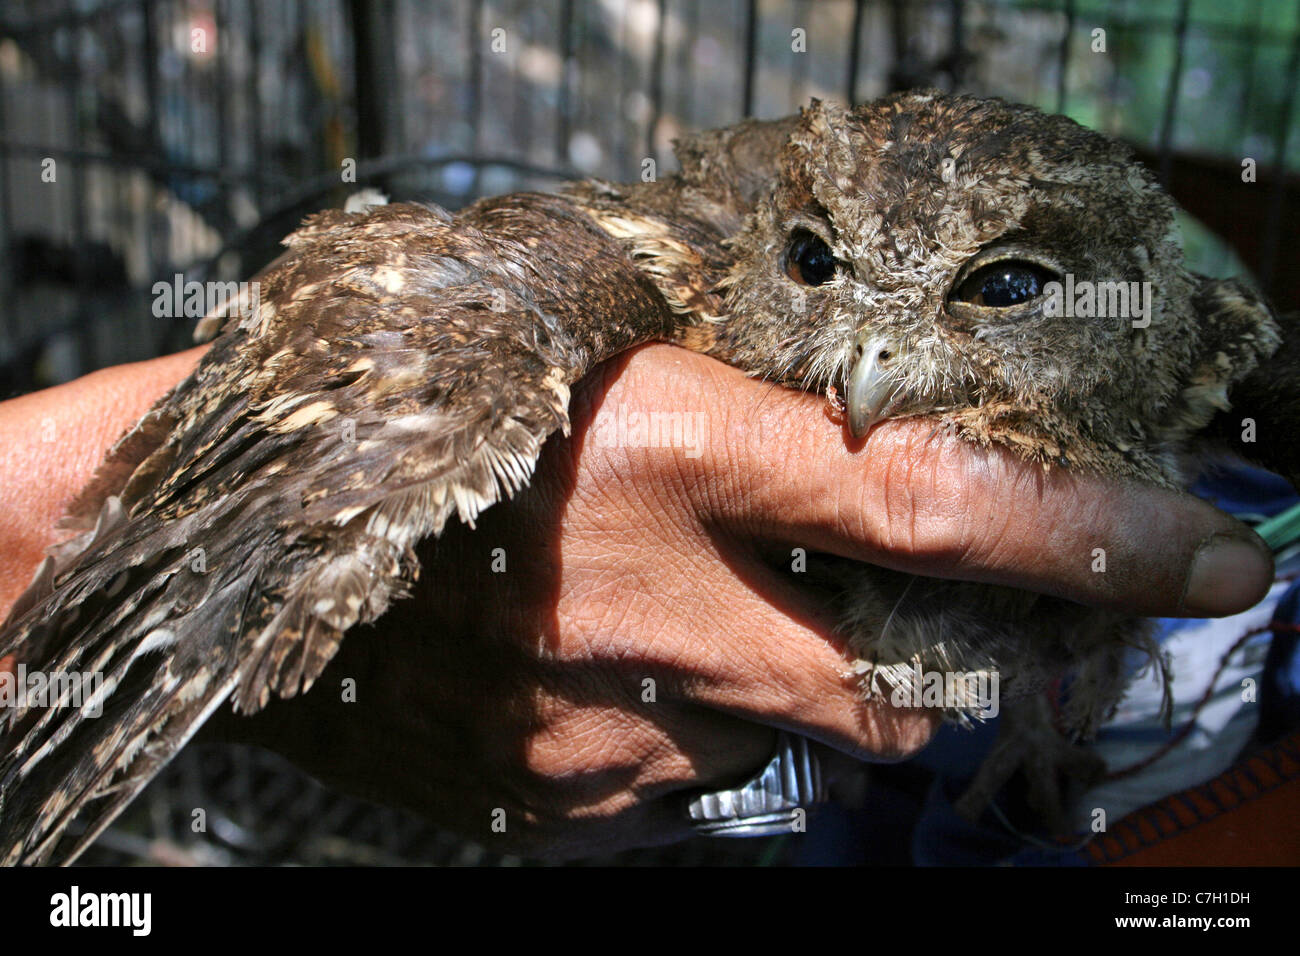 Scops Owl For Sale At Indonesian Bird & Animal Market Stock Photo